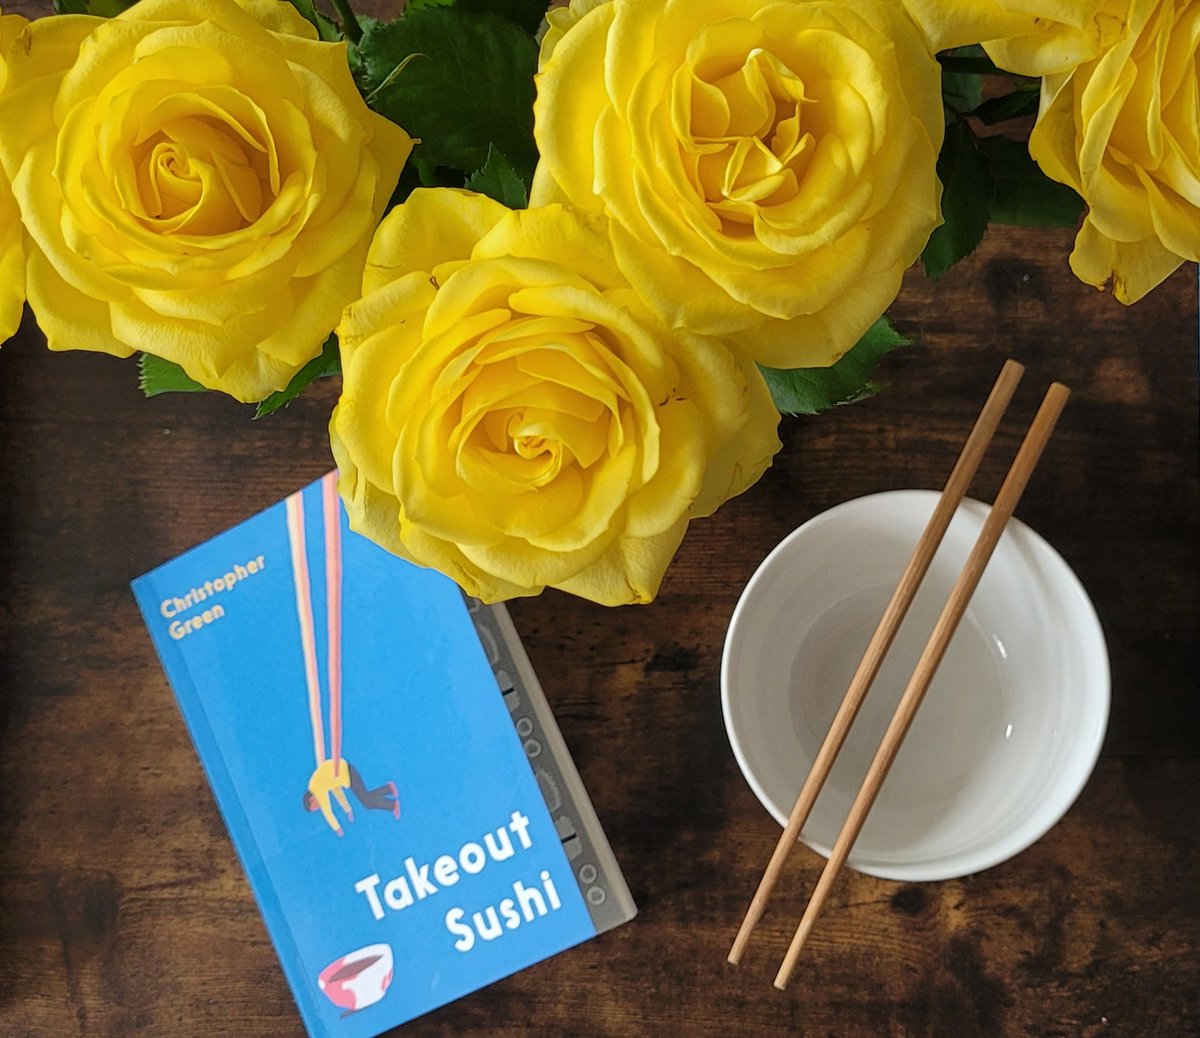 ⭐️⭐️⭐️⭐️⭐️ A wonderfully thought-provoking and at times humorous collection of stories set in modern Japan set alongside stunning illustrations. I once again love the short story and would love to sample more of this Sushi. #takeoutsushi #ChristopherGreen 
instagram.com/p/C6ODHm4L6QR/…